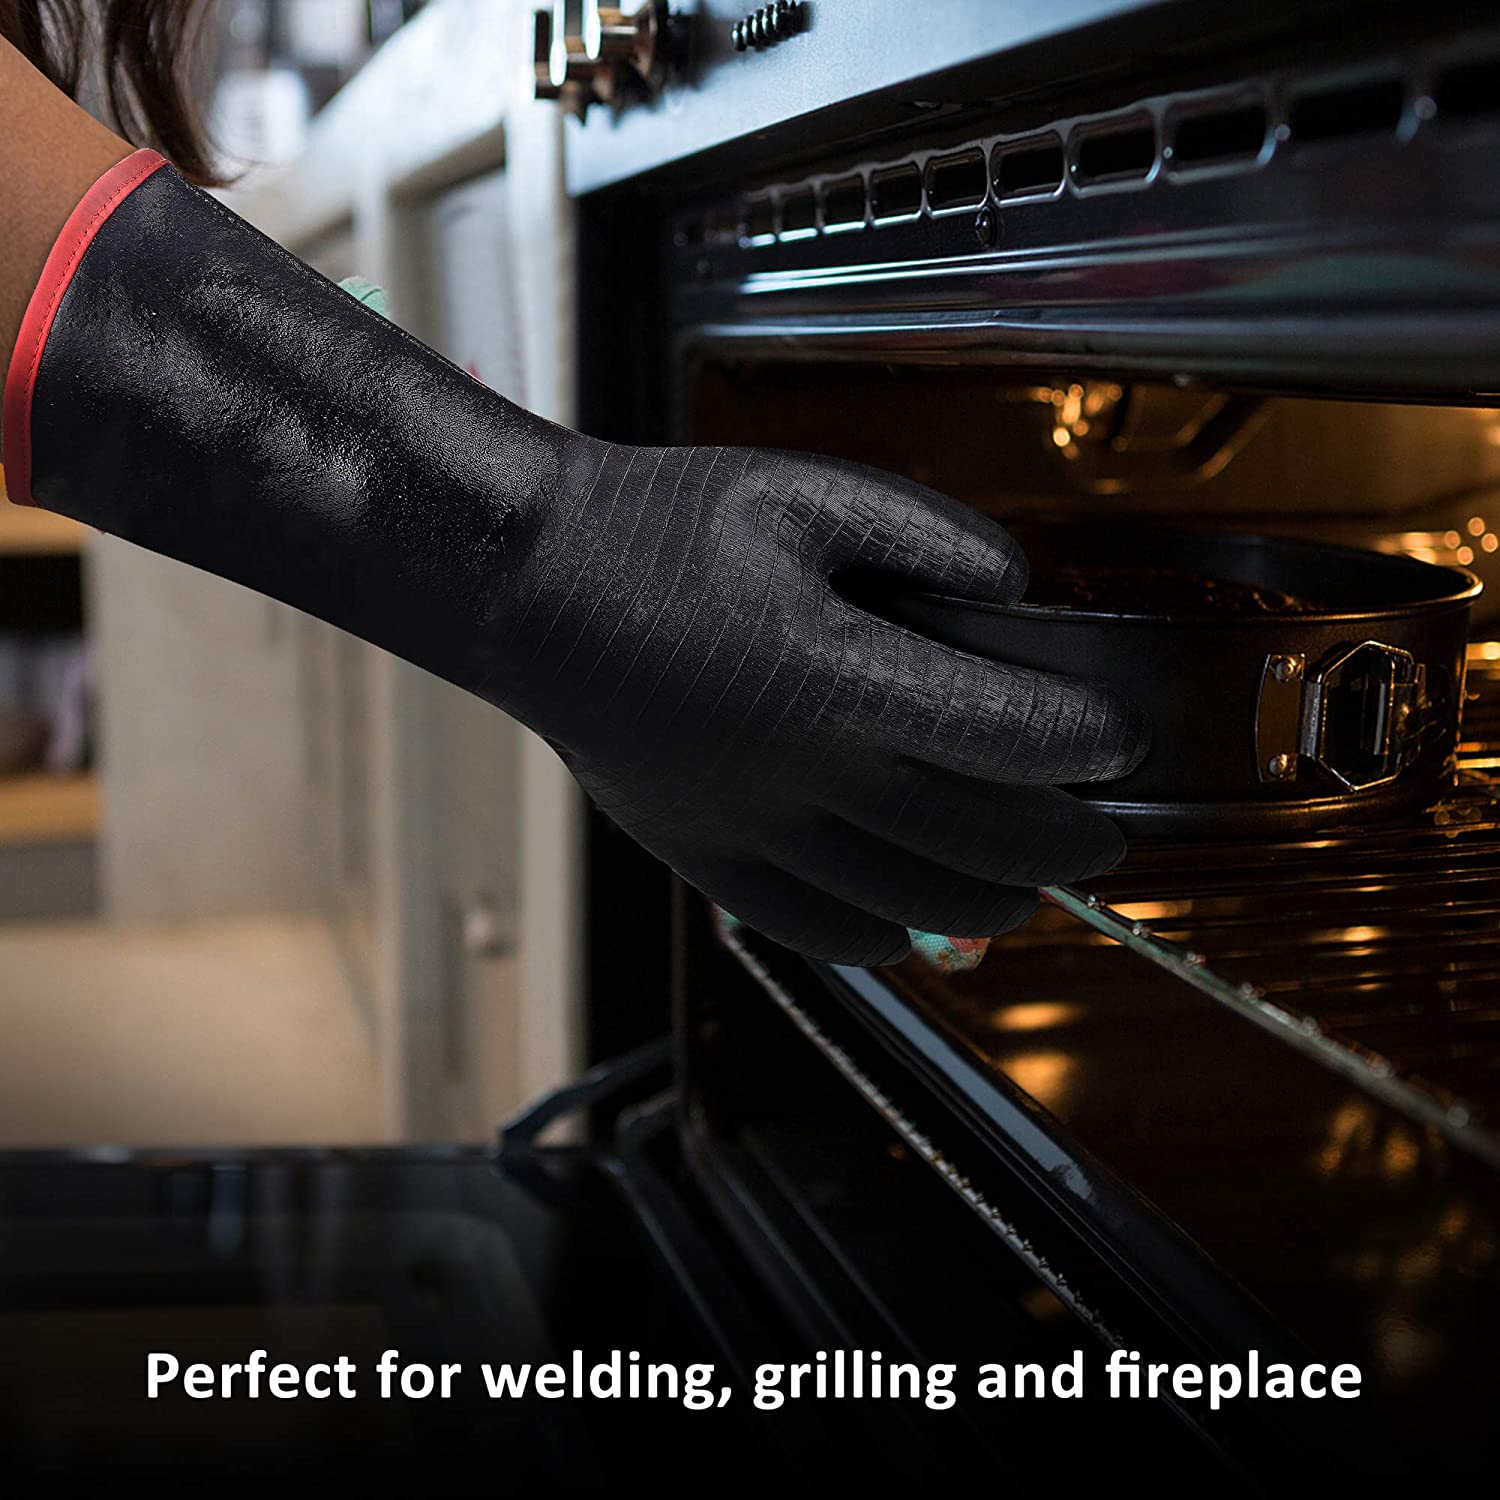 Heat Resistant-Smoker BBQ Gloves 18 Inches,932℉, Grill, Cooking Barbecue Gloves, to Handling Heat Food Right on Your Fryer,Grill,Oven. Waterproof, Fireproof, Oil Resistant Neoprene Coating - image 5 of 7